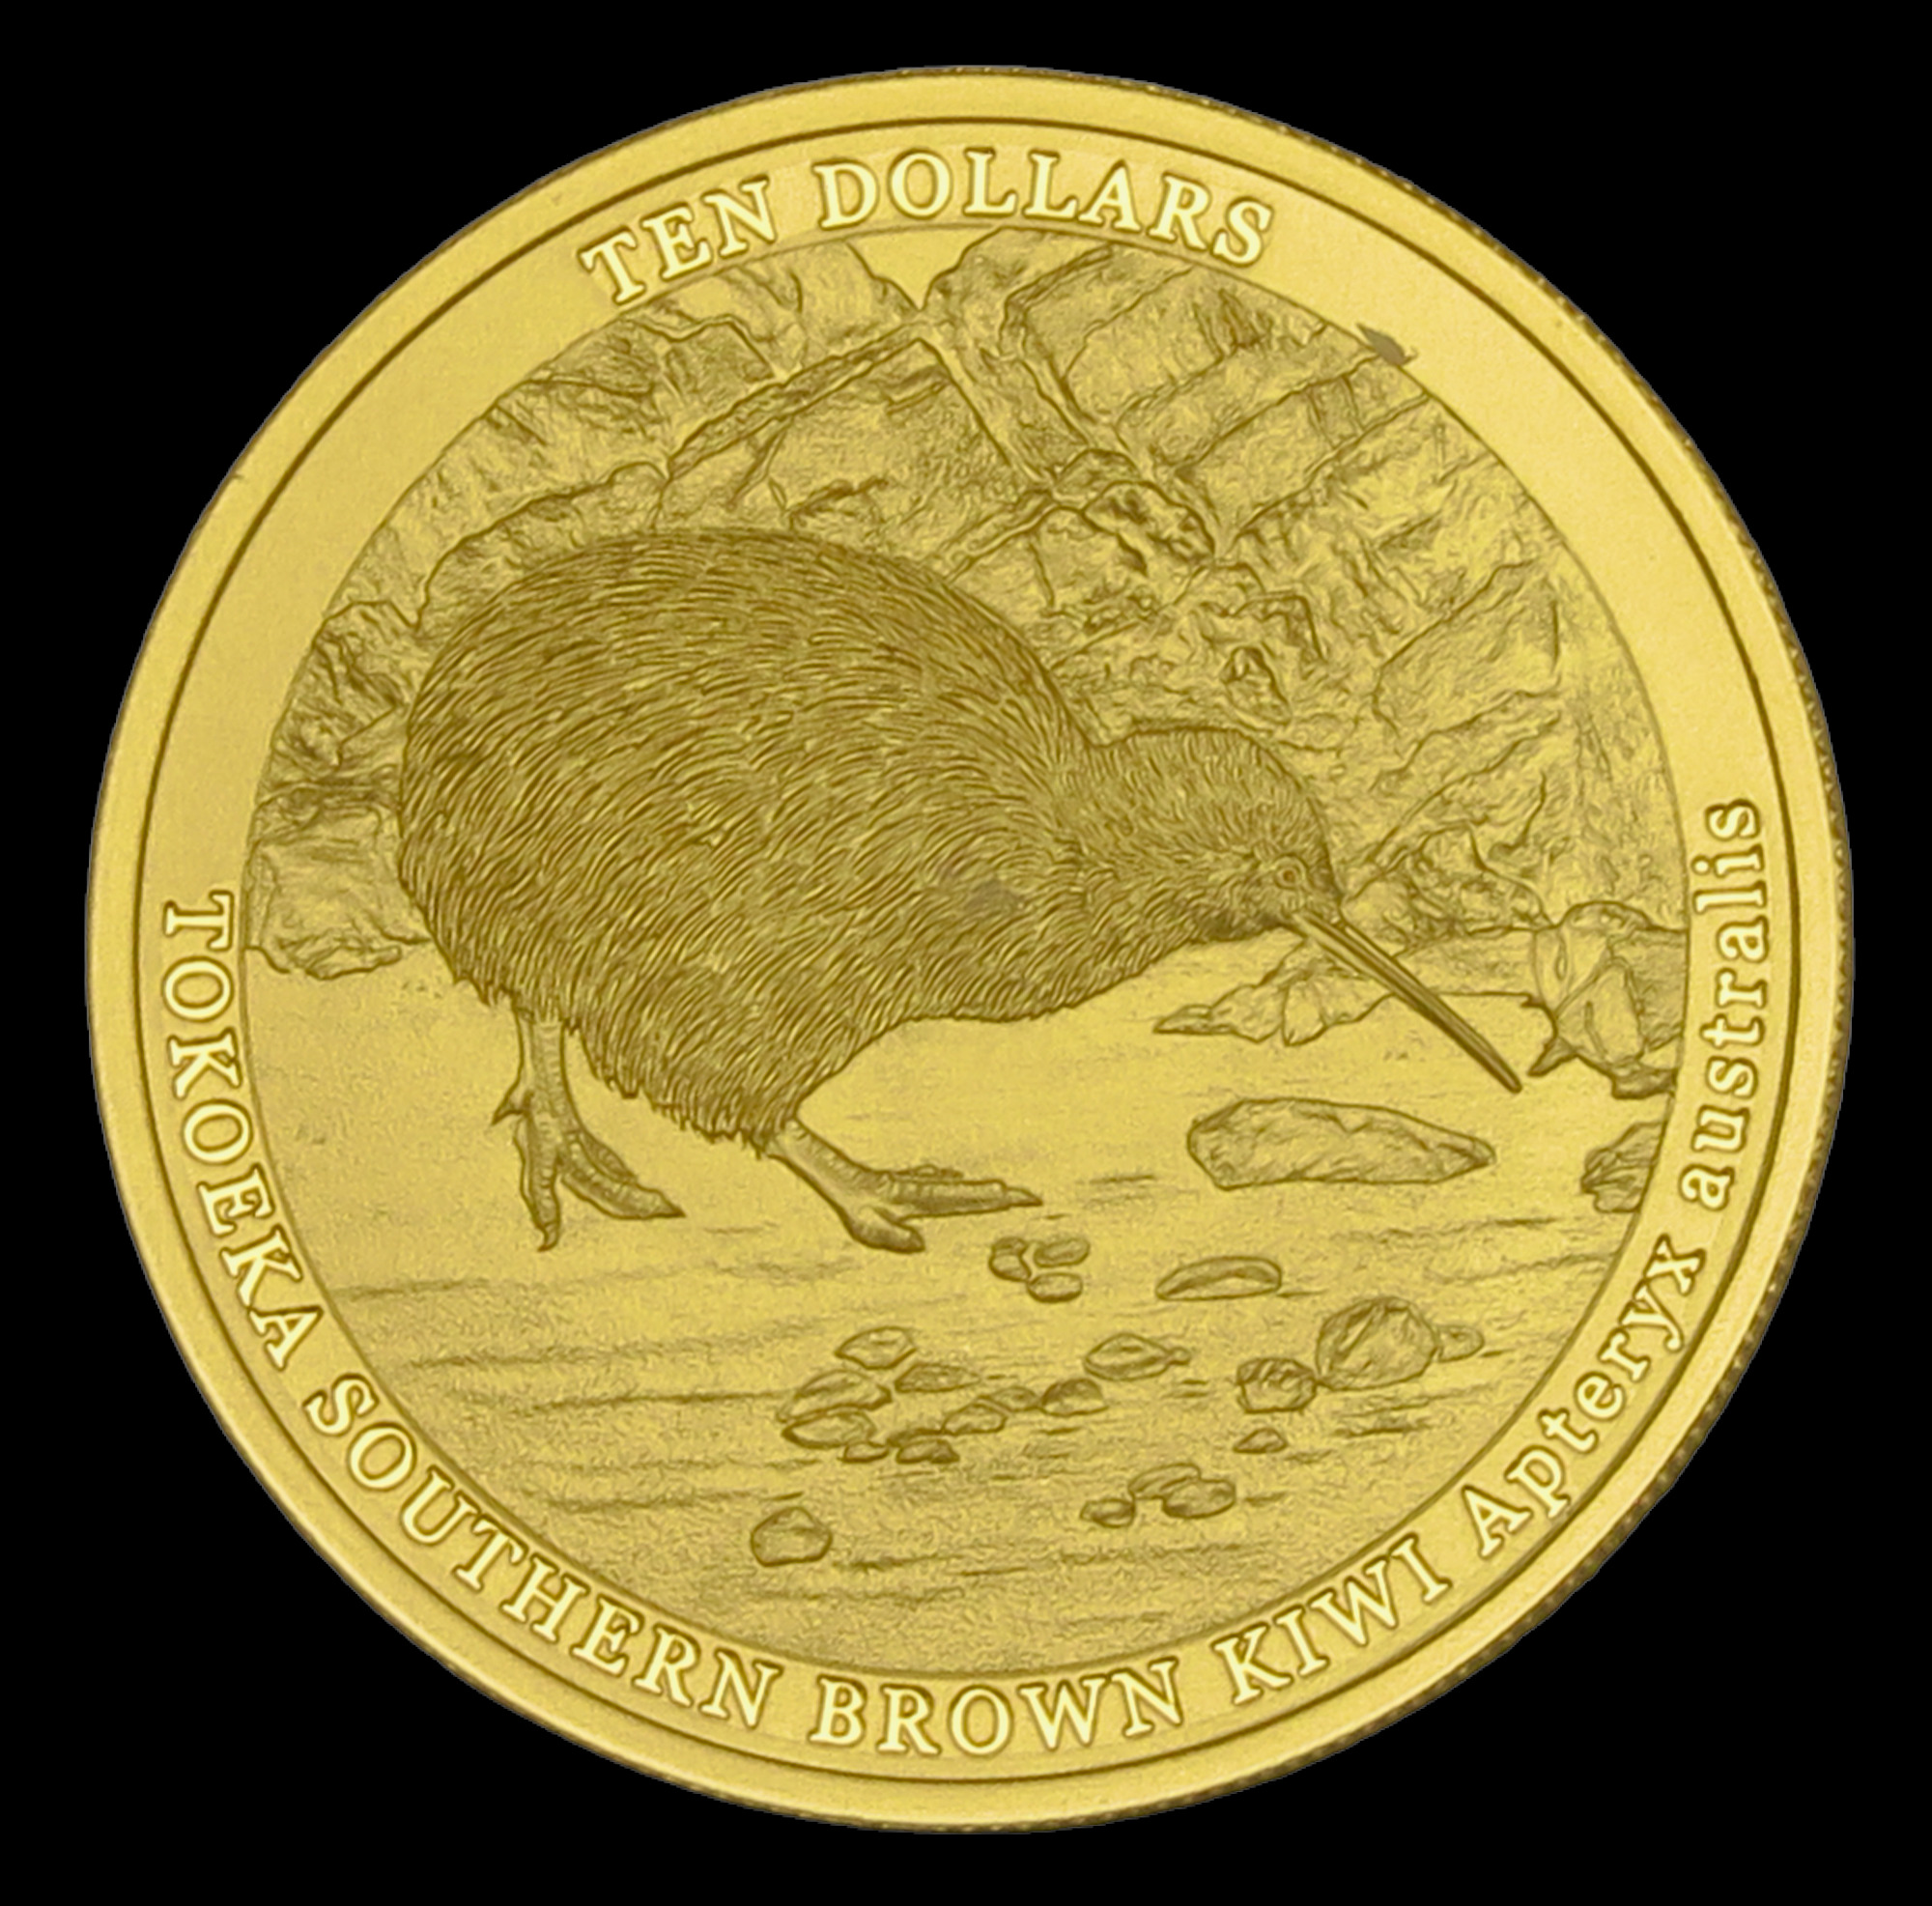 New zealand gold coins for sale